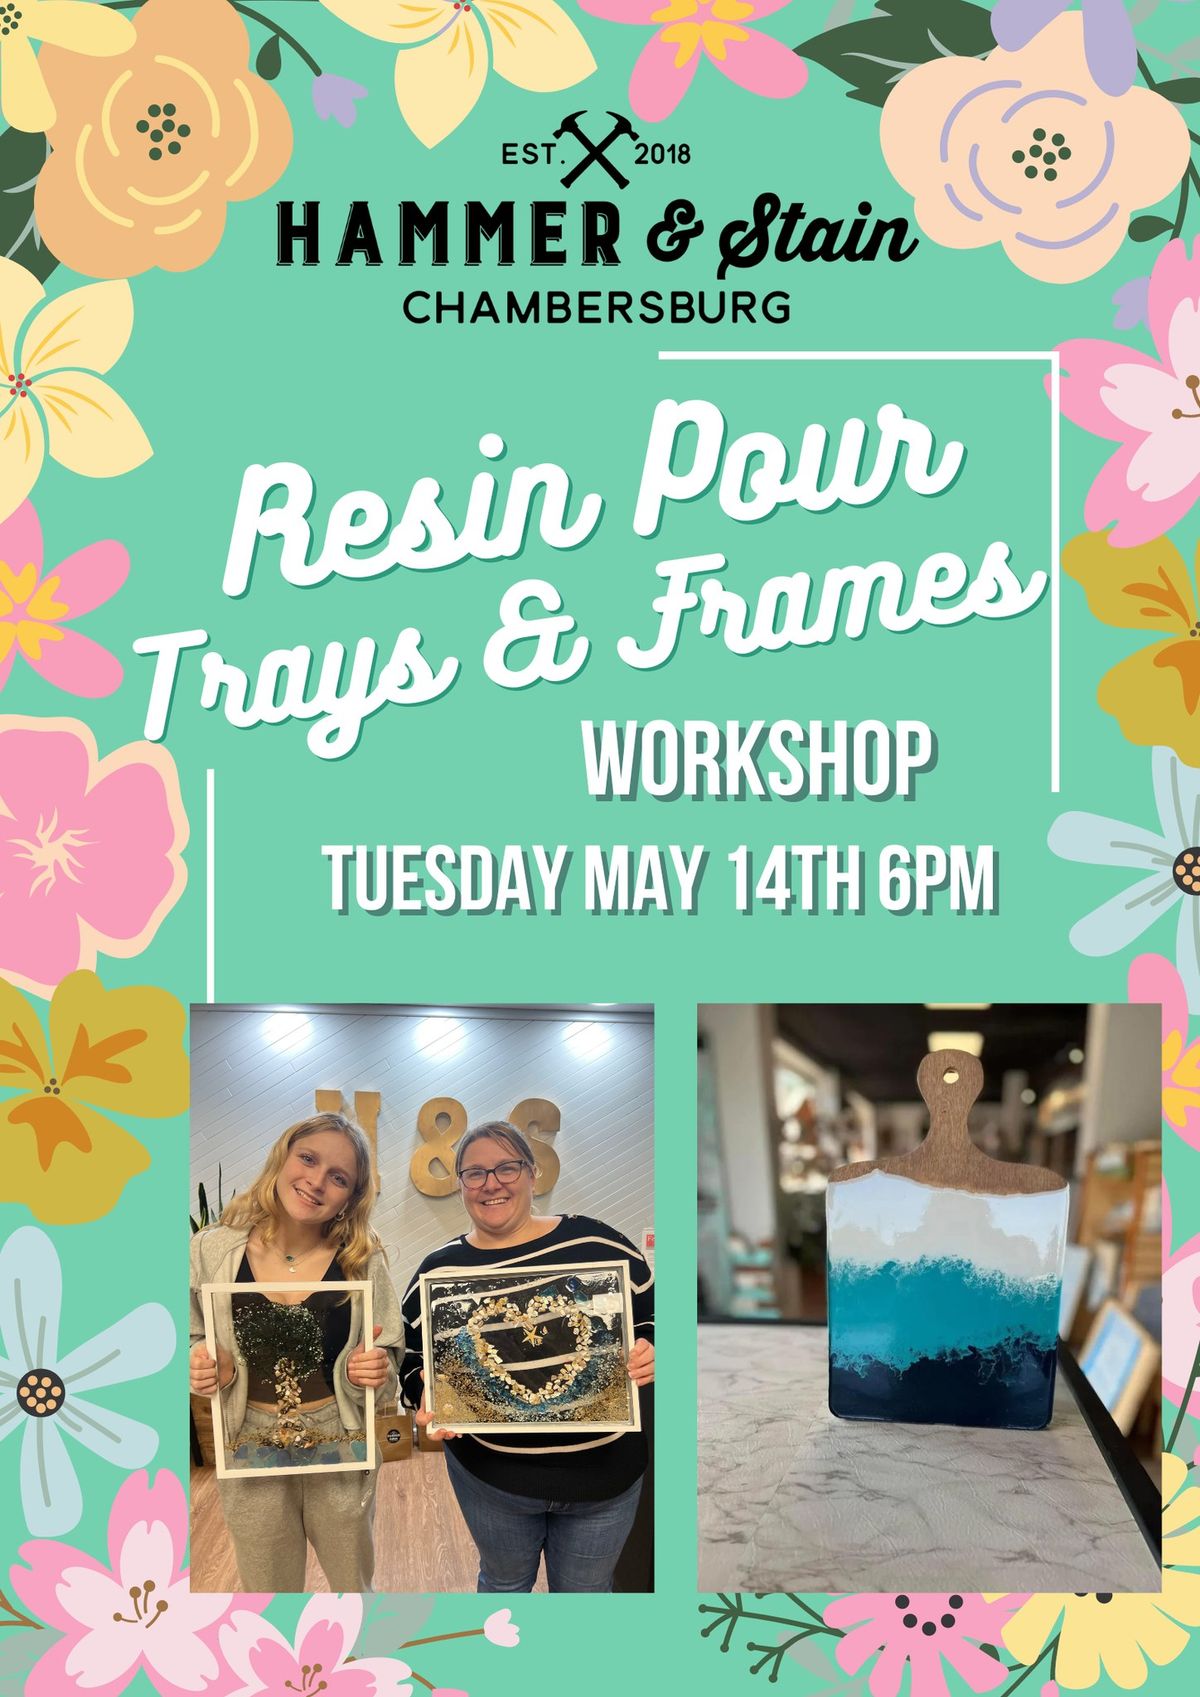 Tuesday May 14th- Resin Pour Trays & Frames Workshop 6pm